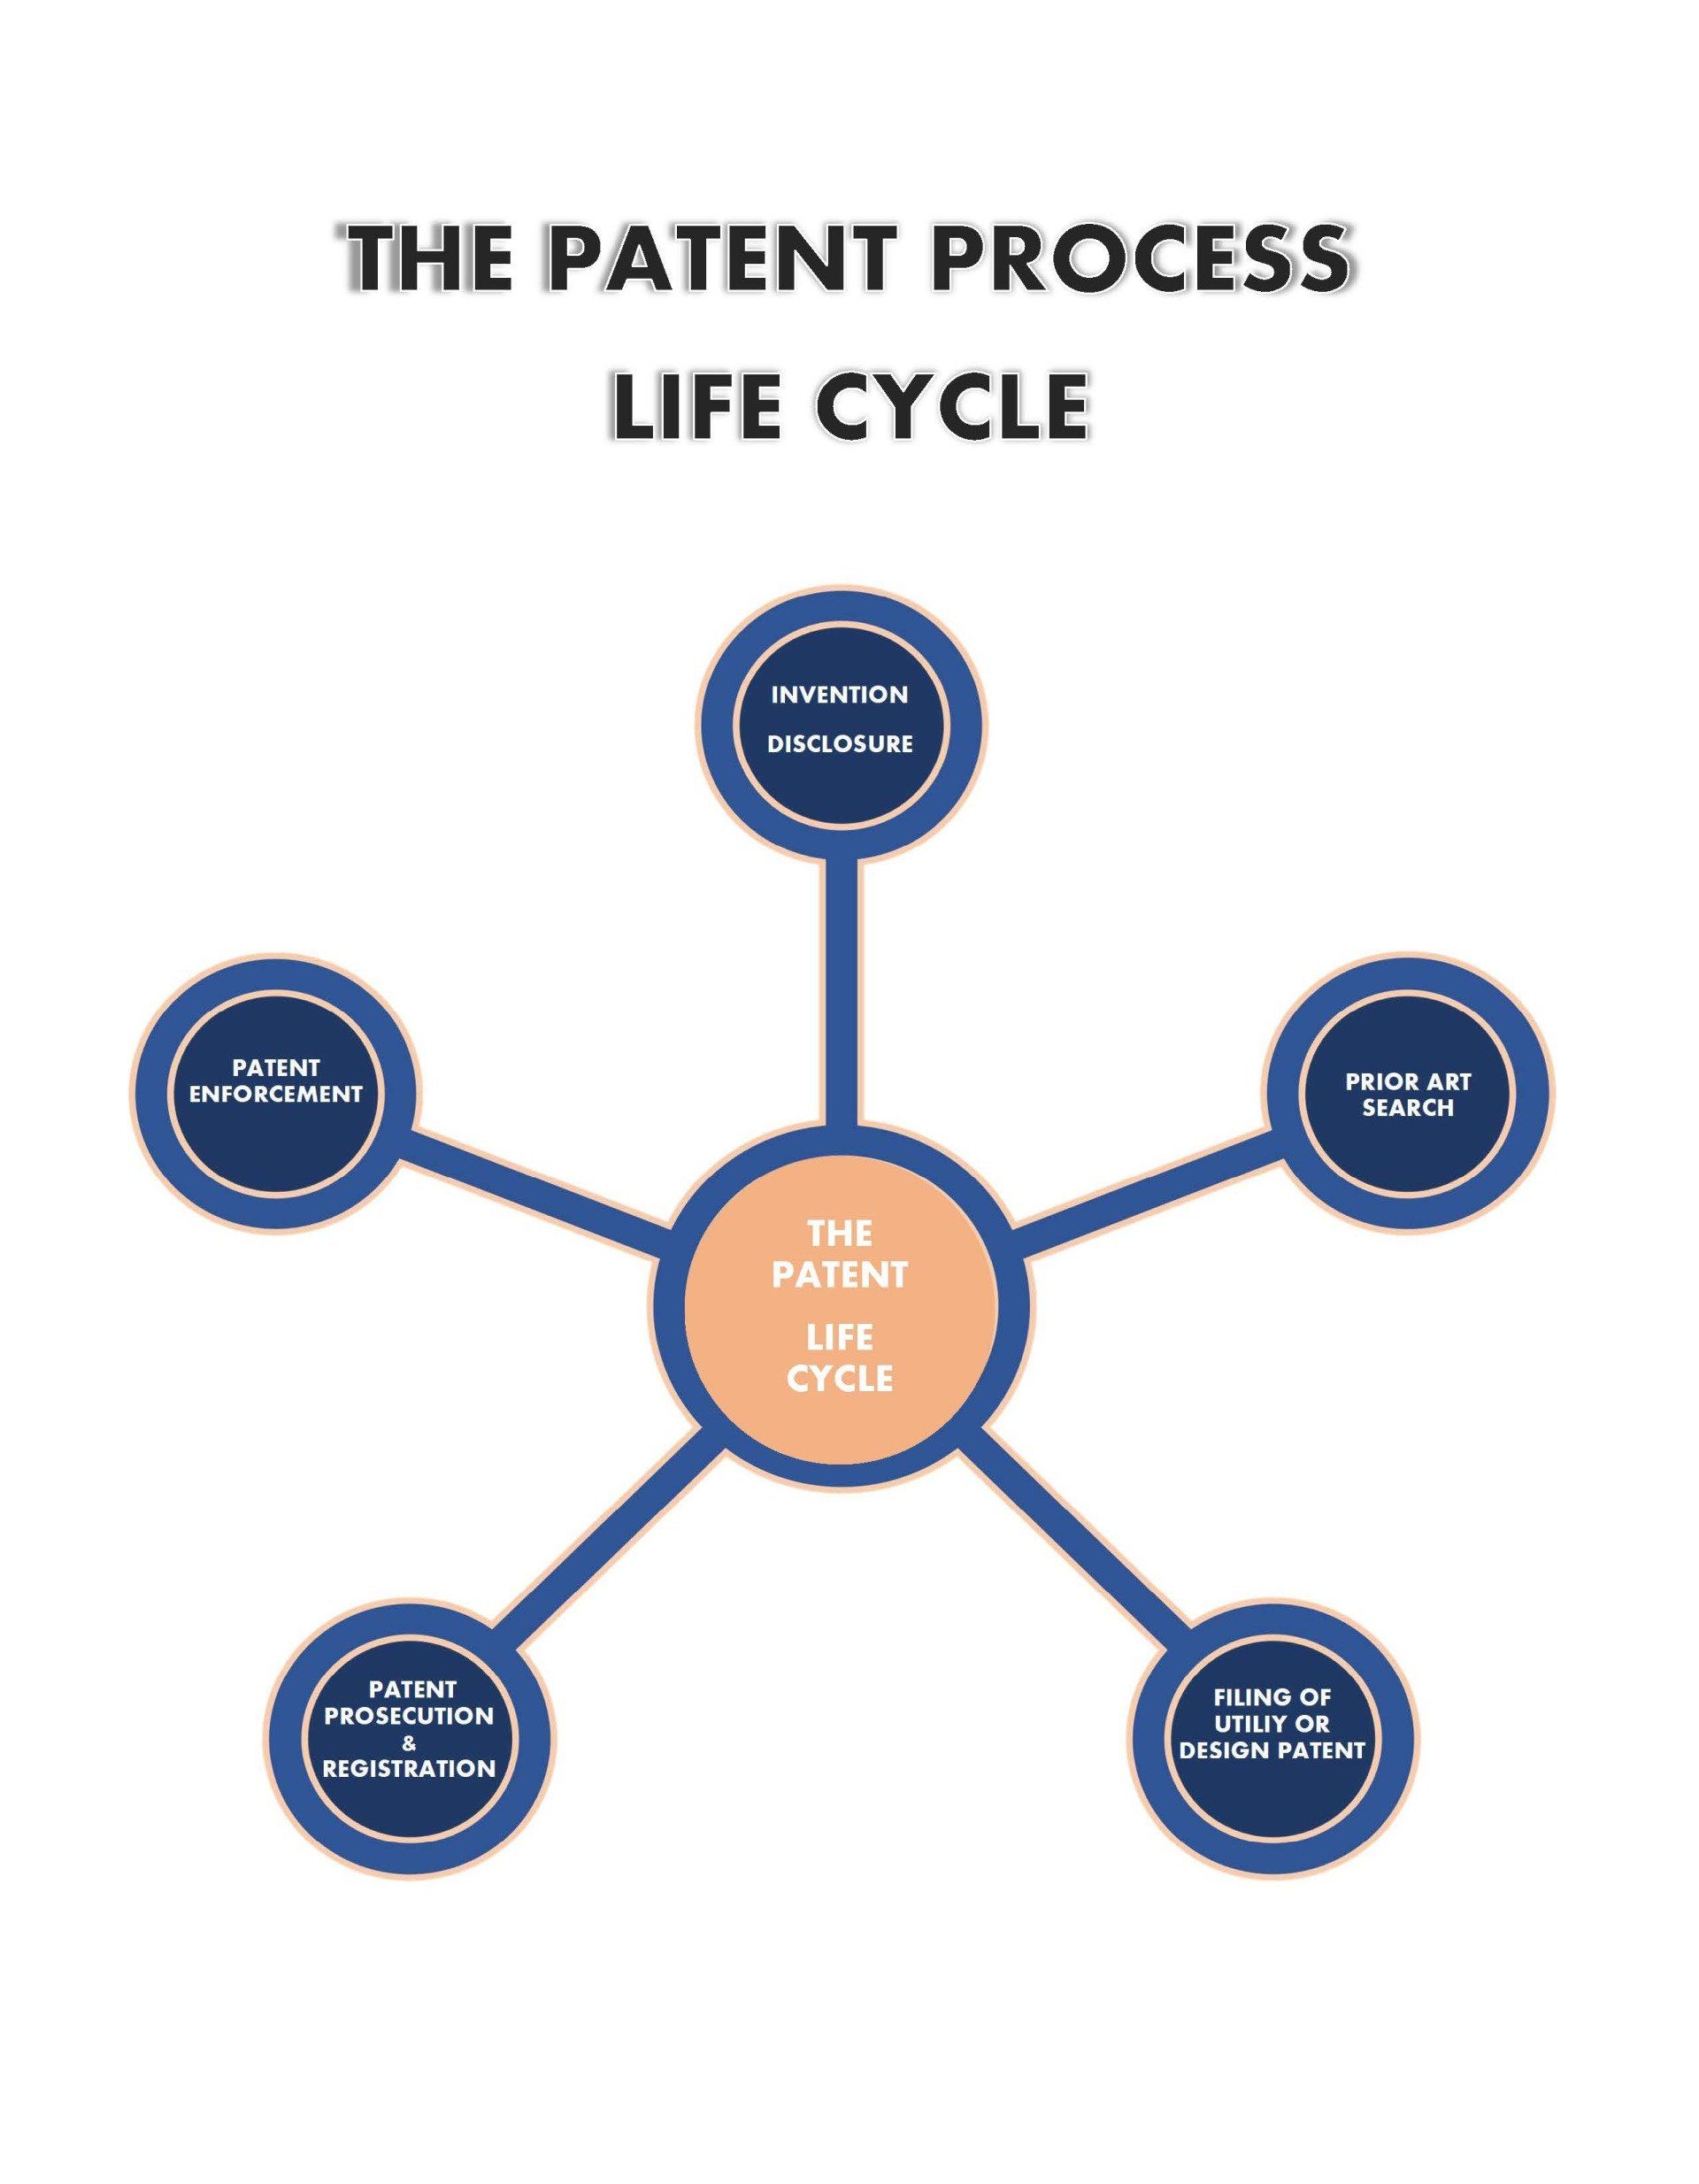 Overview of The Patenting Process Life Cycle